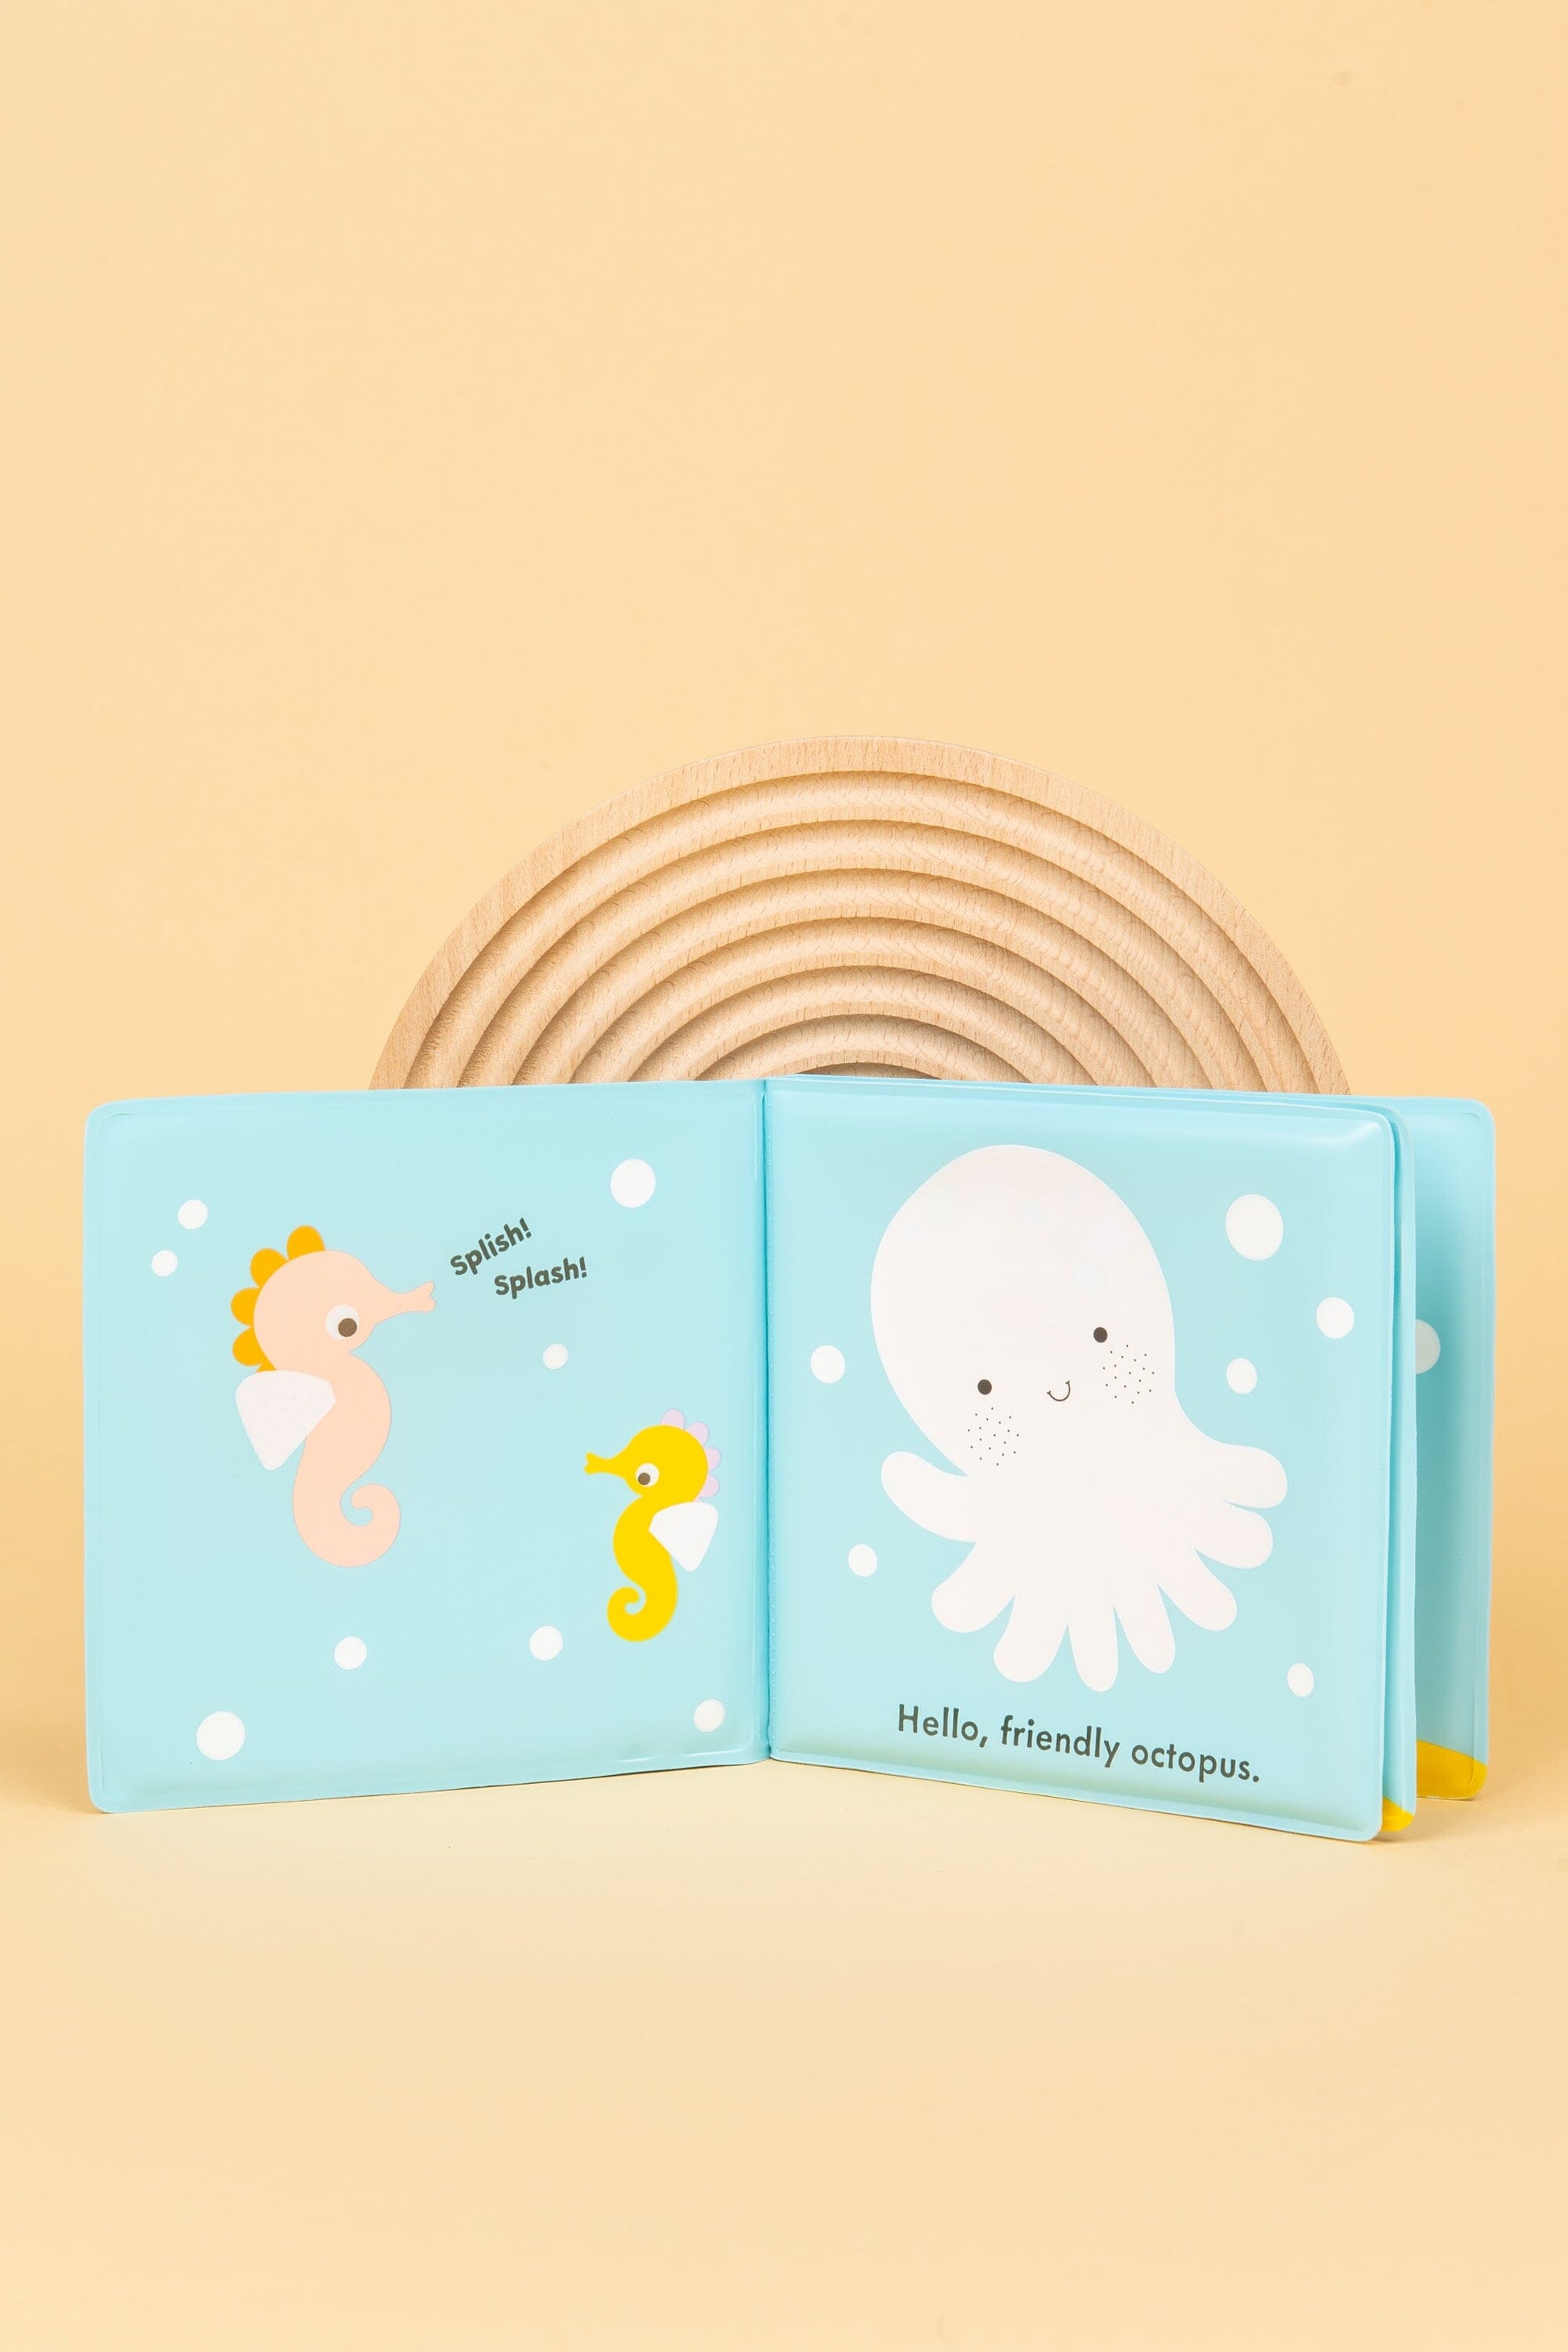 My Magic Bath Book Baby Book Baby Touch 